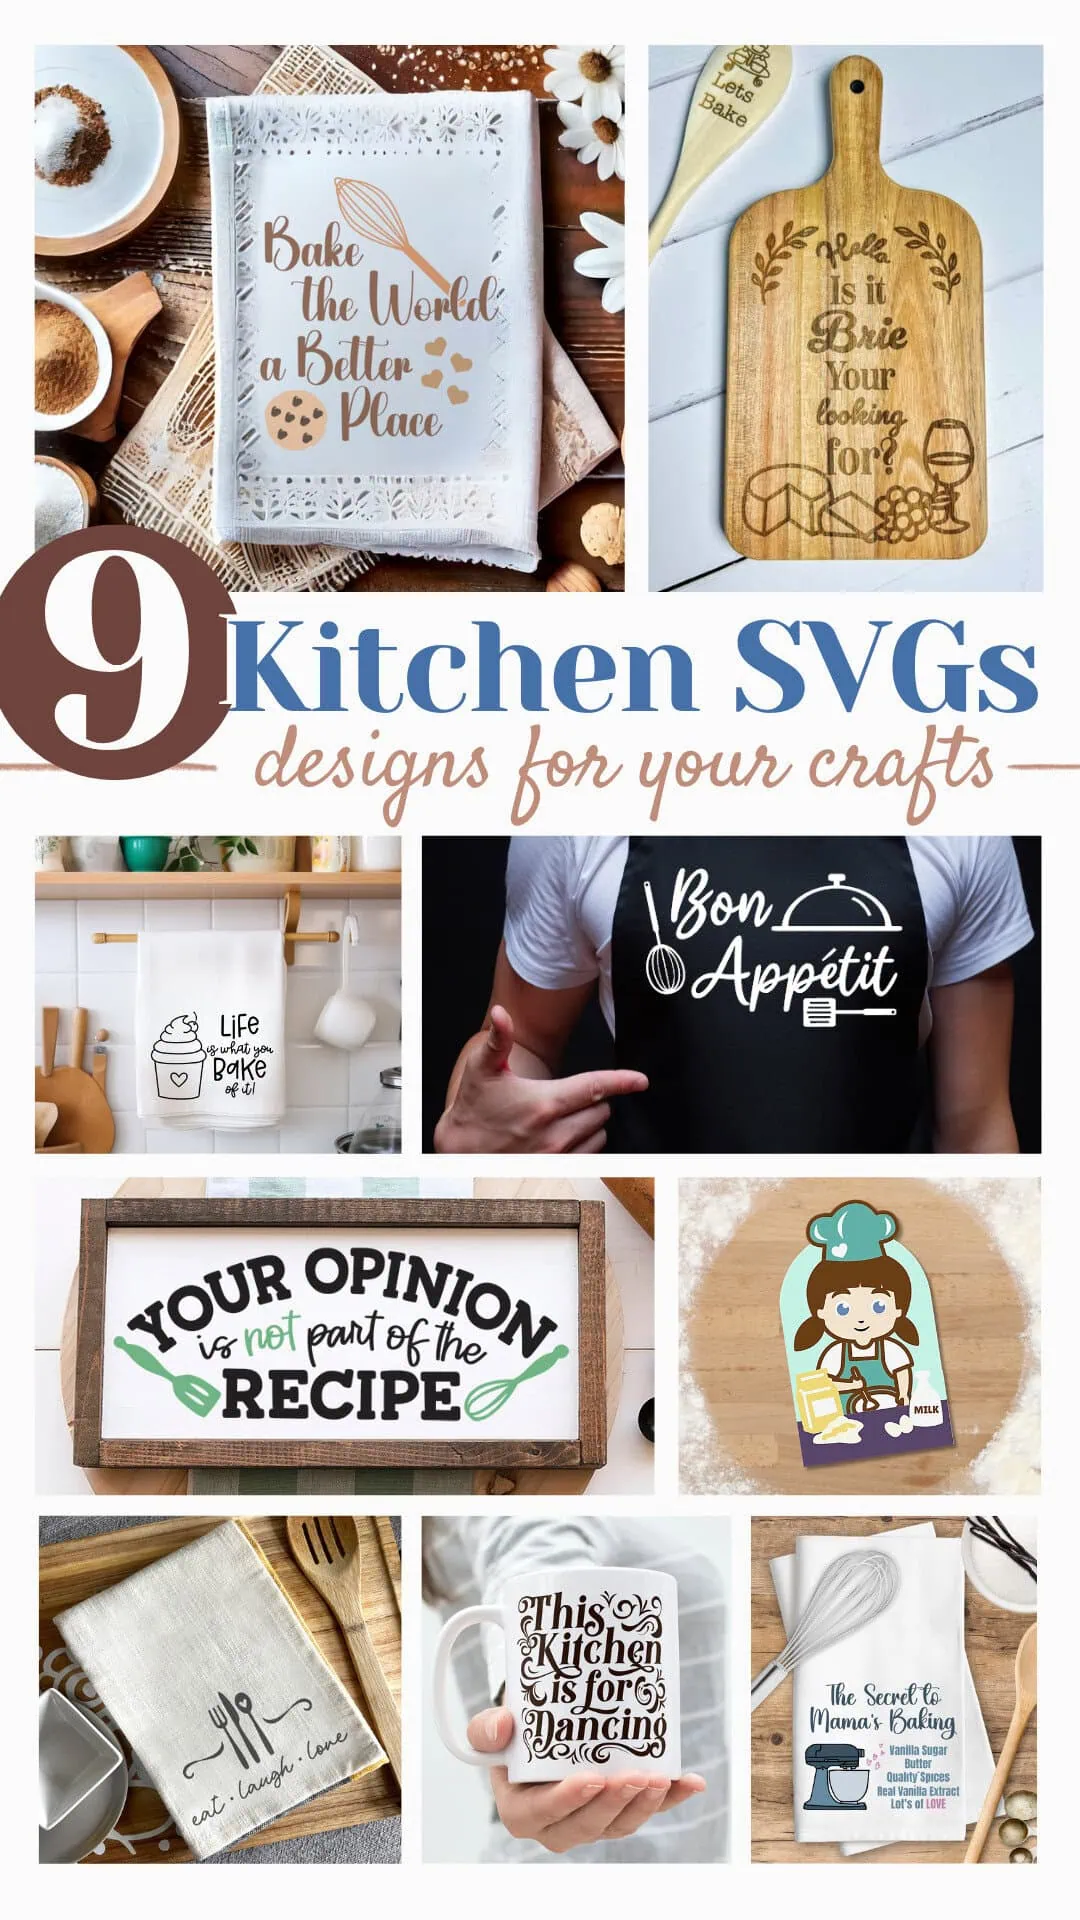 Create custom signs, towels and gifts with kitchen SVG files